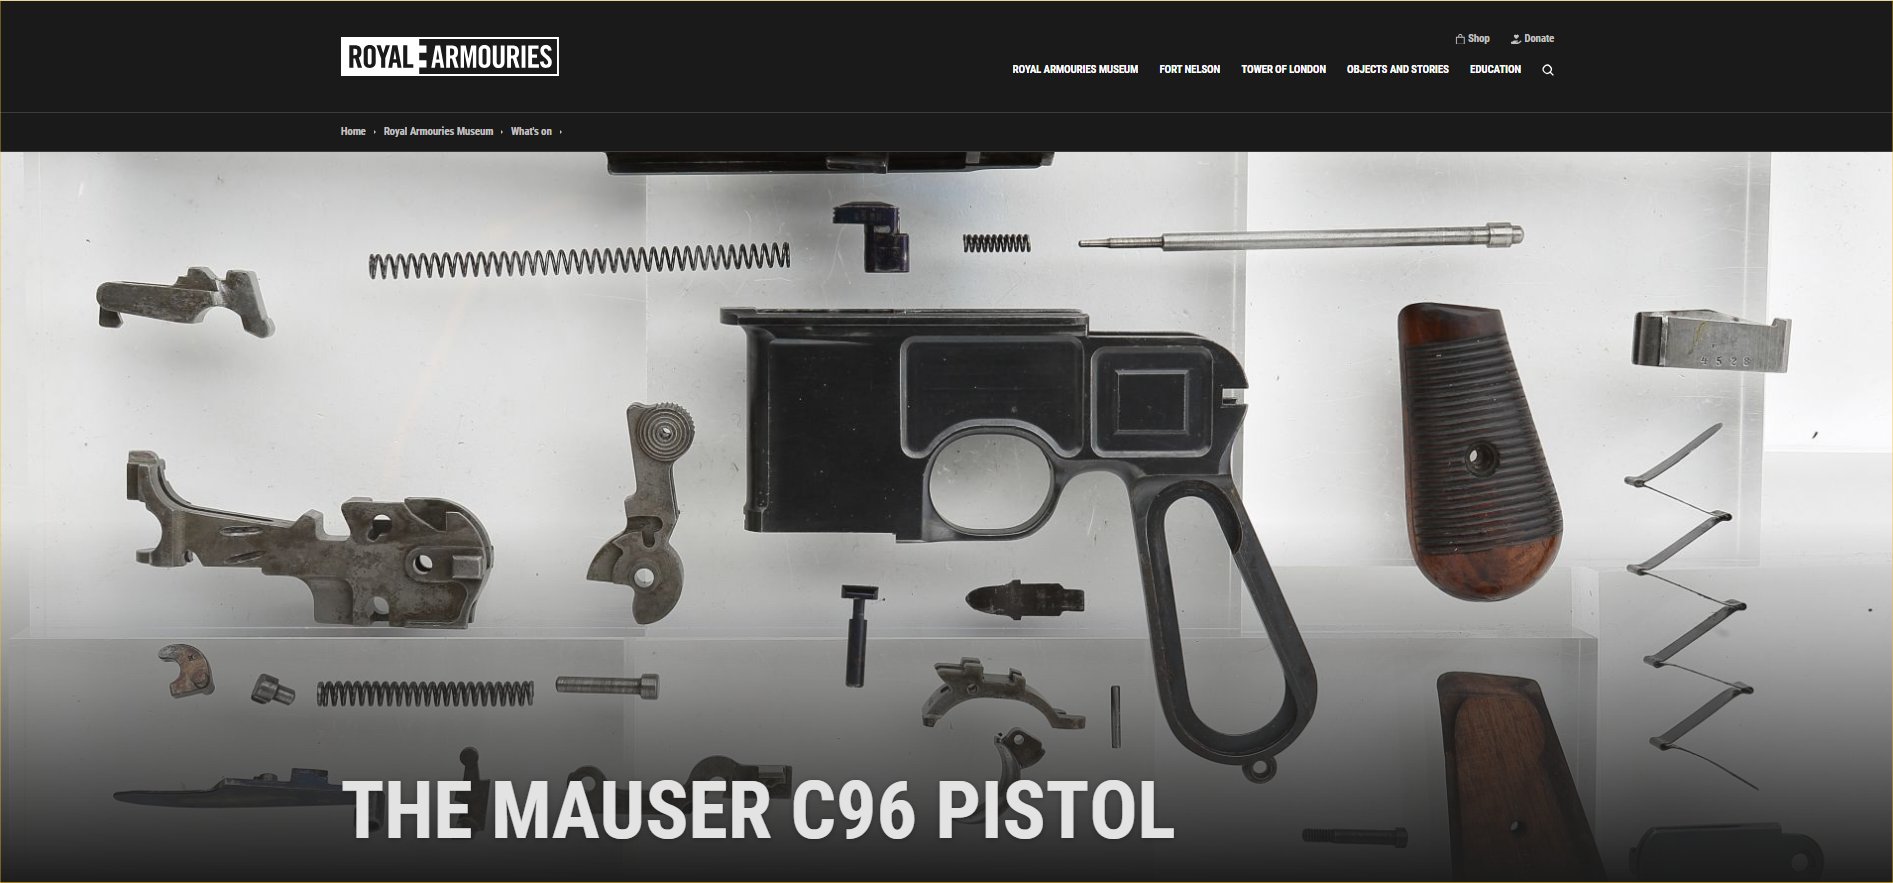 C96 Mauser Event Royal Armouries